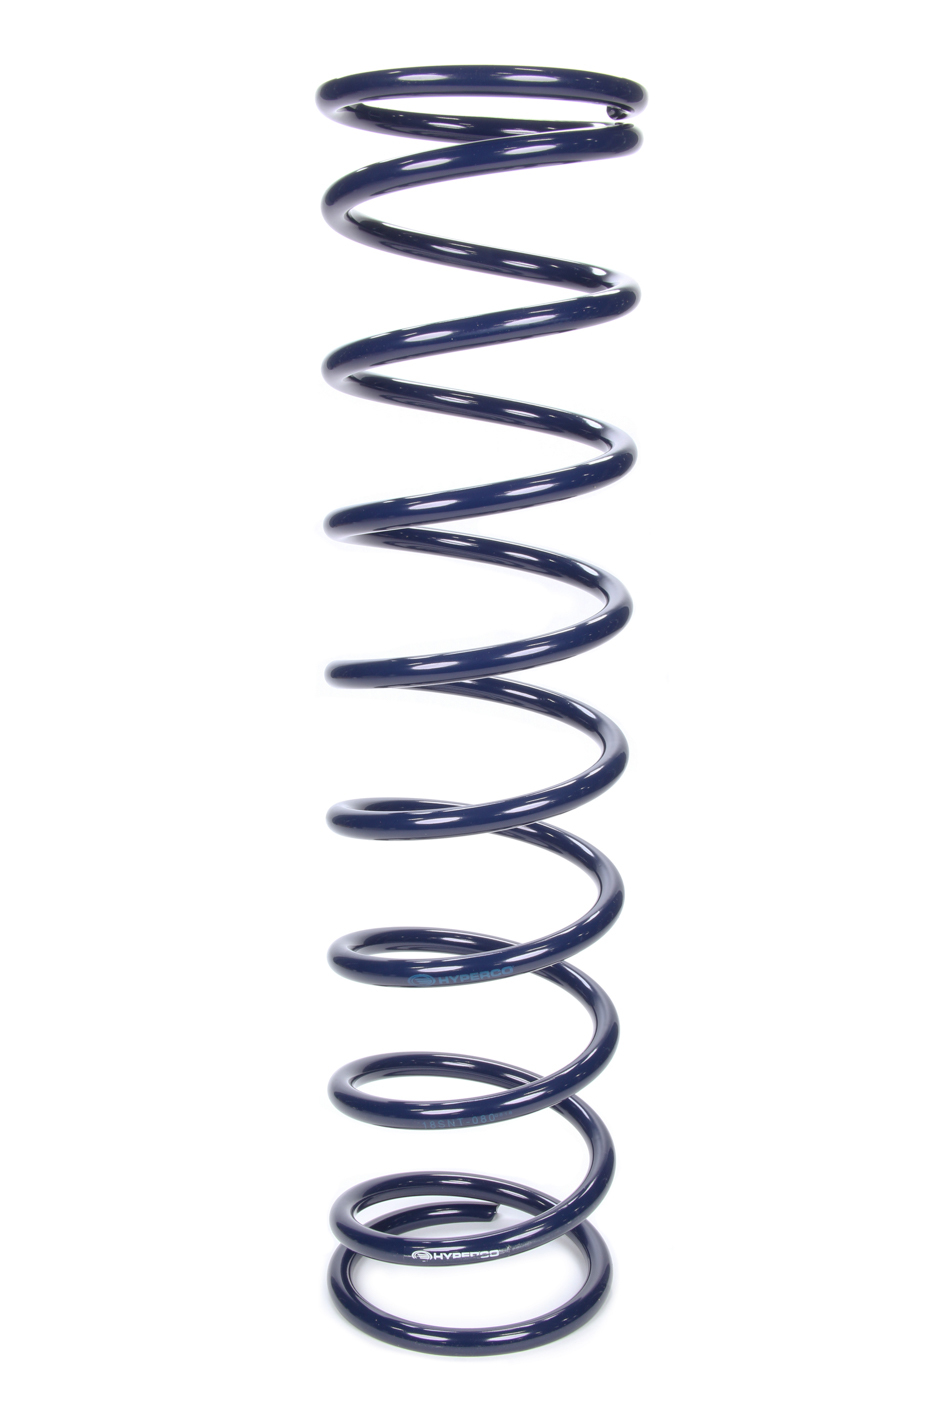 Hyperco 18SNT-150 Coil Spring, Conventional, 5.0 in OD, 20.000 in Length, 150 lb/in Spring Rate, Rear, Steel, Blue Powder Coat, Each